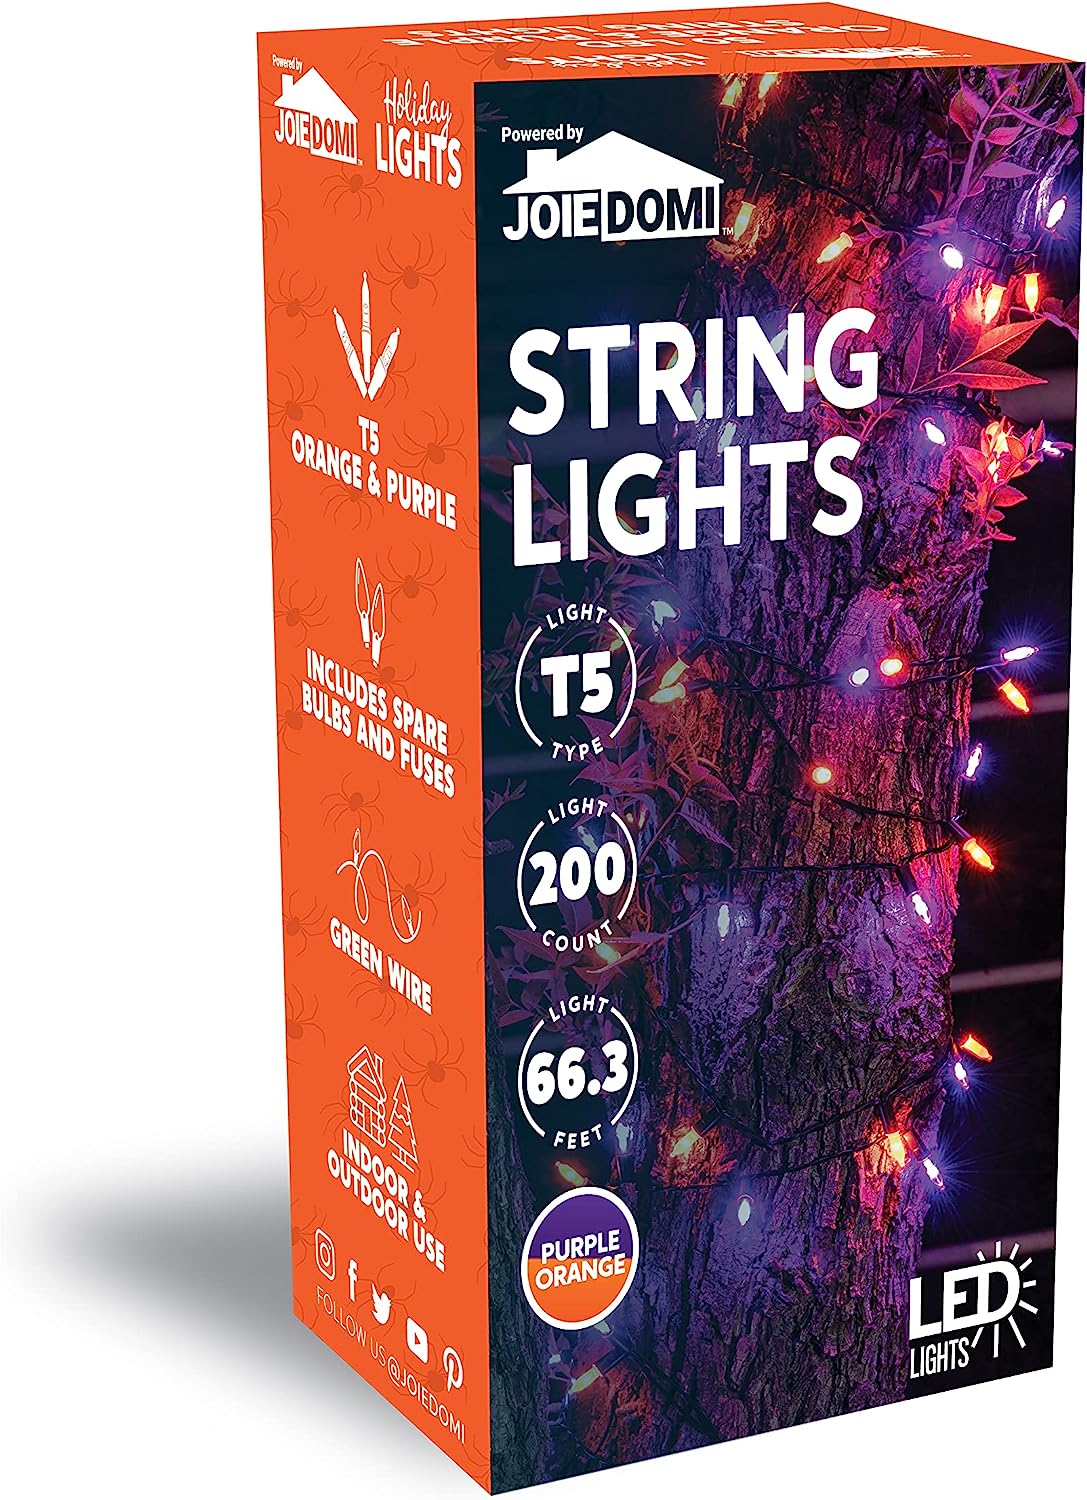 200-Count 67.3ft LED Orange & Purple Halloween String Lights with 8 Modes